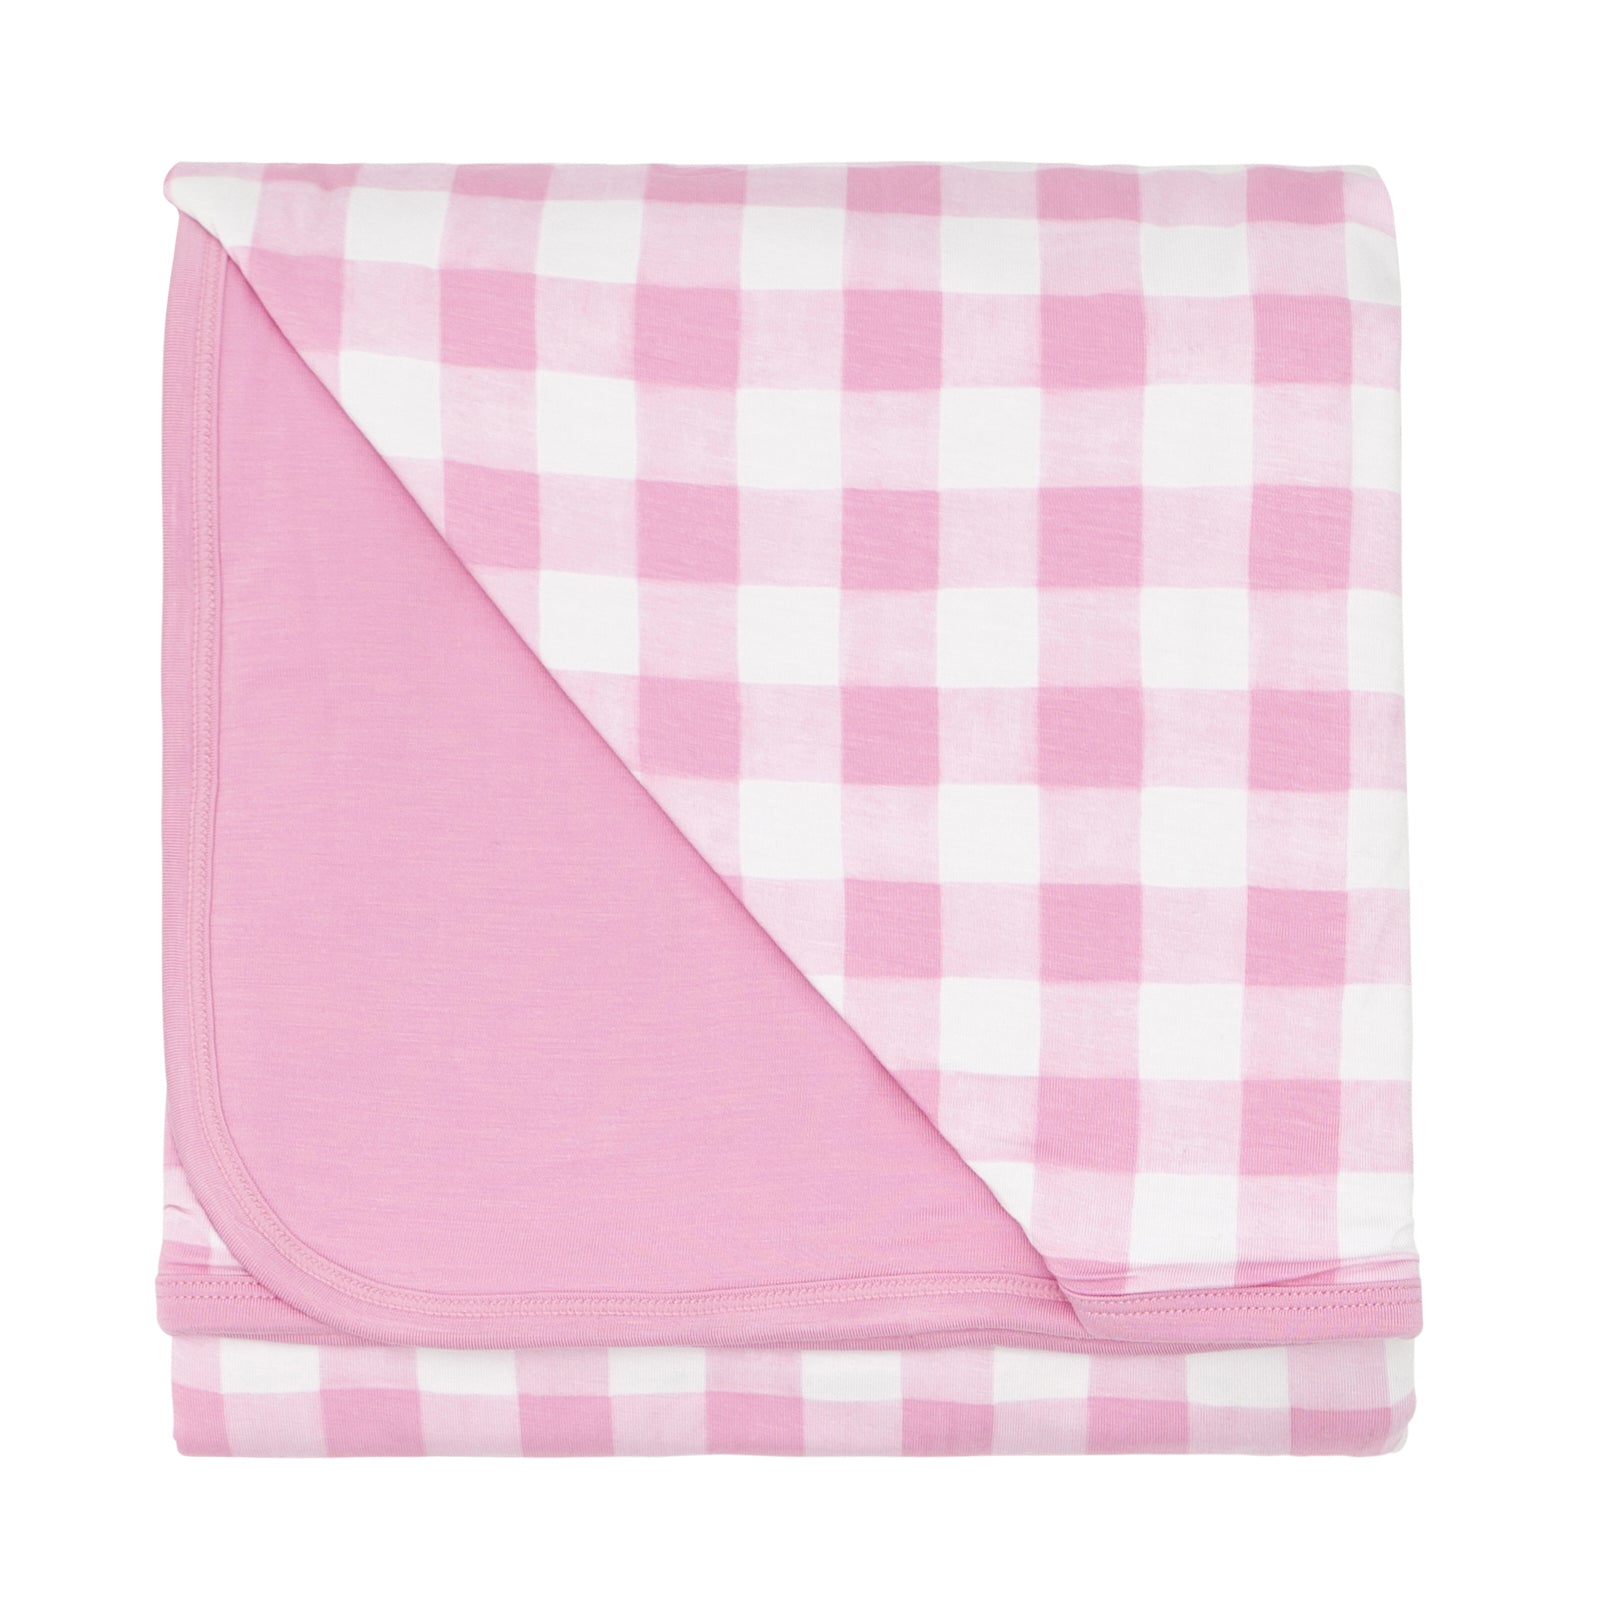 Flat lay image of a Pink Gingham large cloud blanket showing the solid pink backing